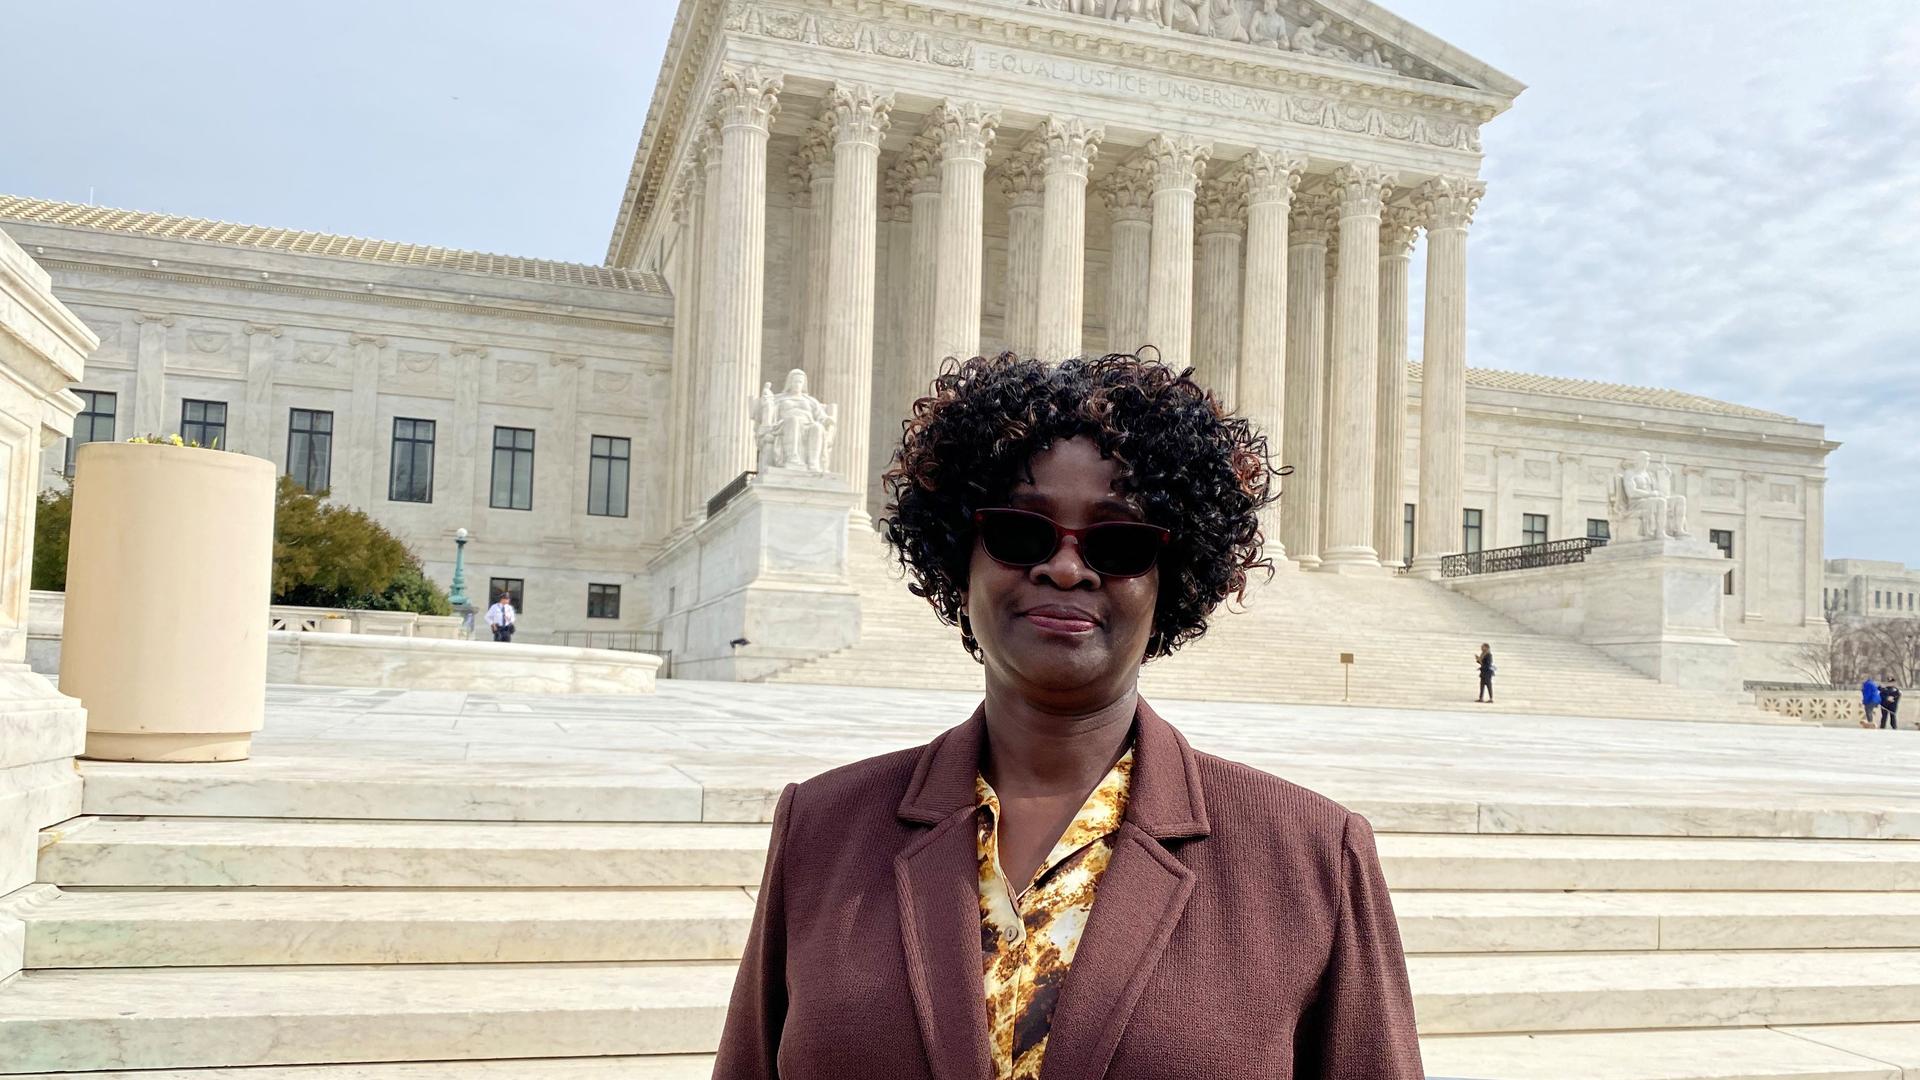 Doreen Oport, who was injured in the attack on the US Embassy in Nairobi, Kenya in 1998, stands outside the US Supreme Court after oral arguments in Washington, Feb. 24, 2020. 